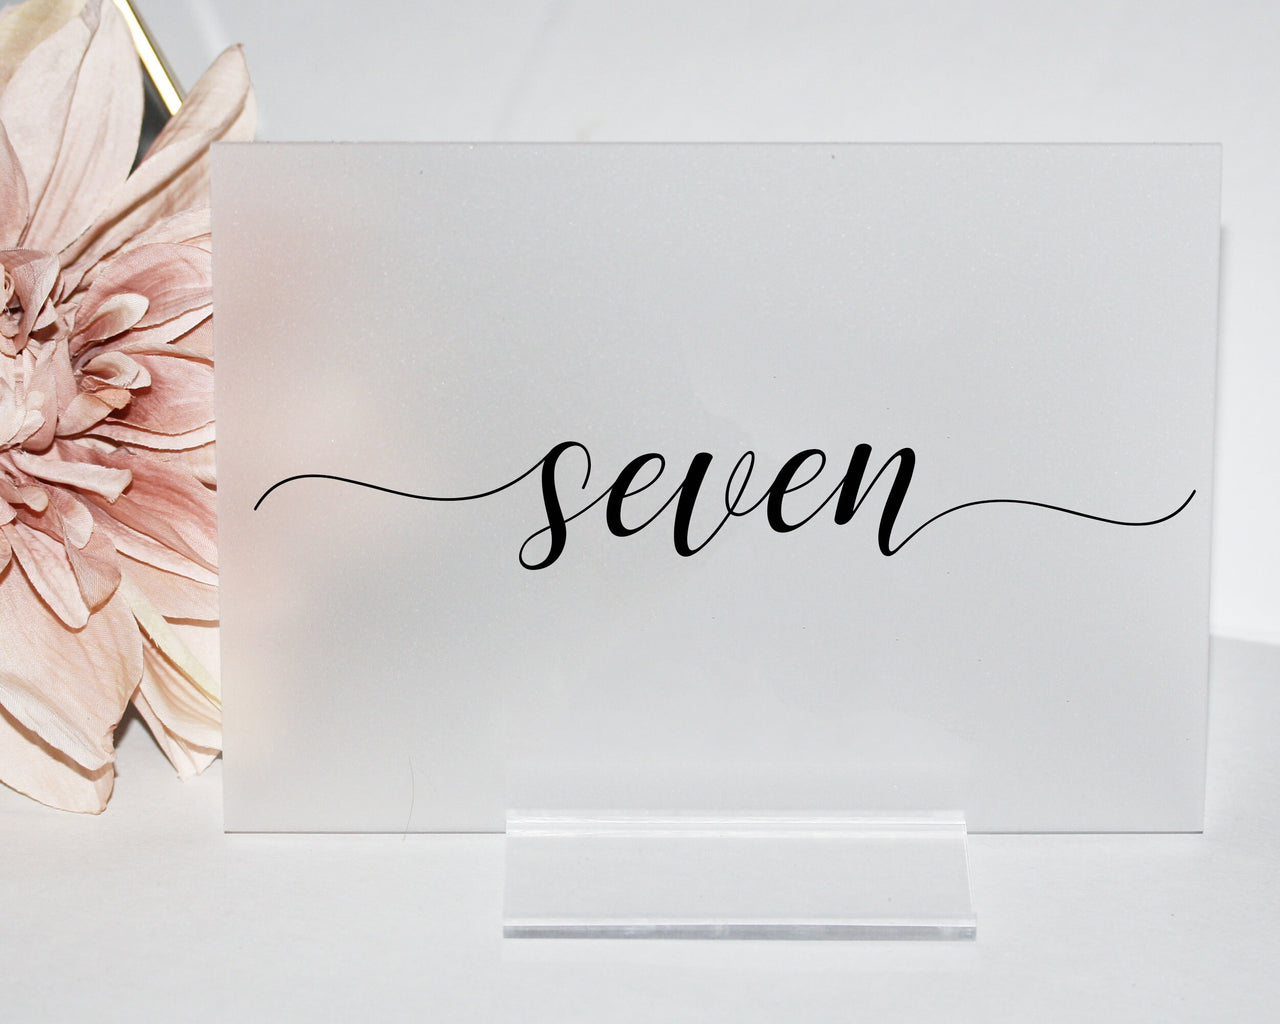 Custom Acrylic Table Numbers with stand Minimalist lucite Clear Wedding decor boho chic script glam modern rustic unique - TN27ARV